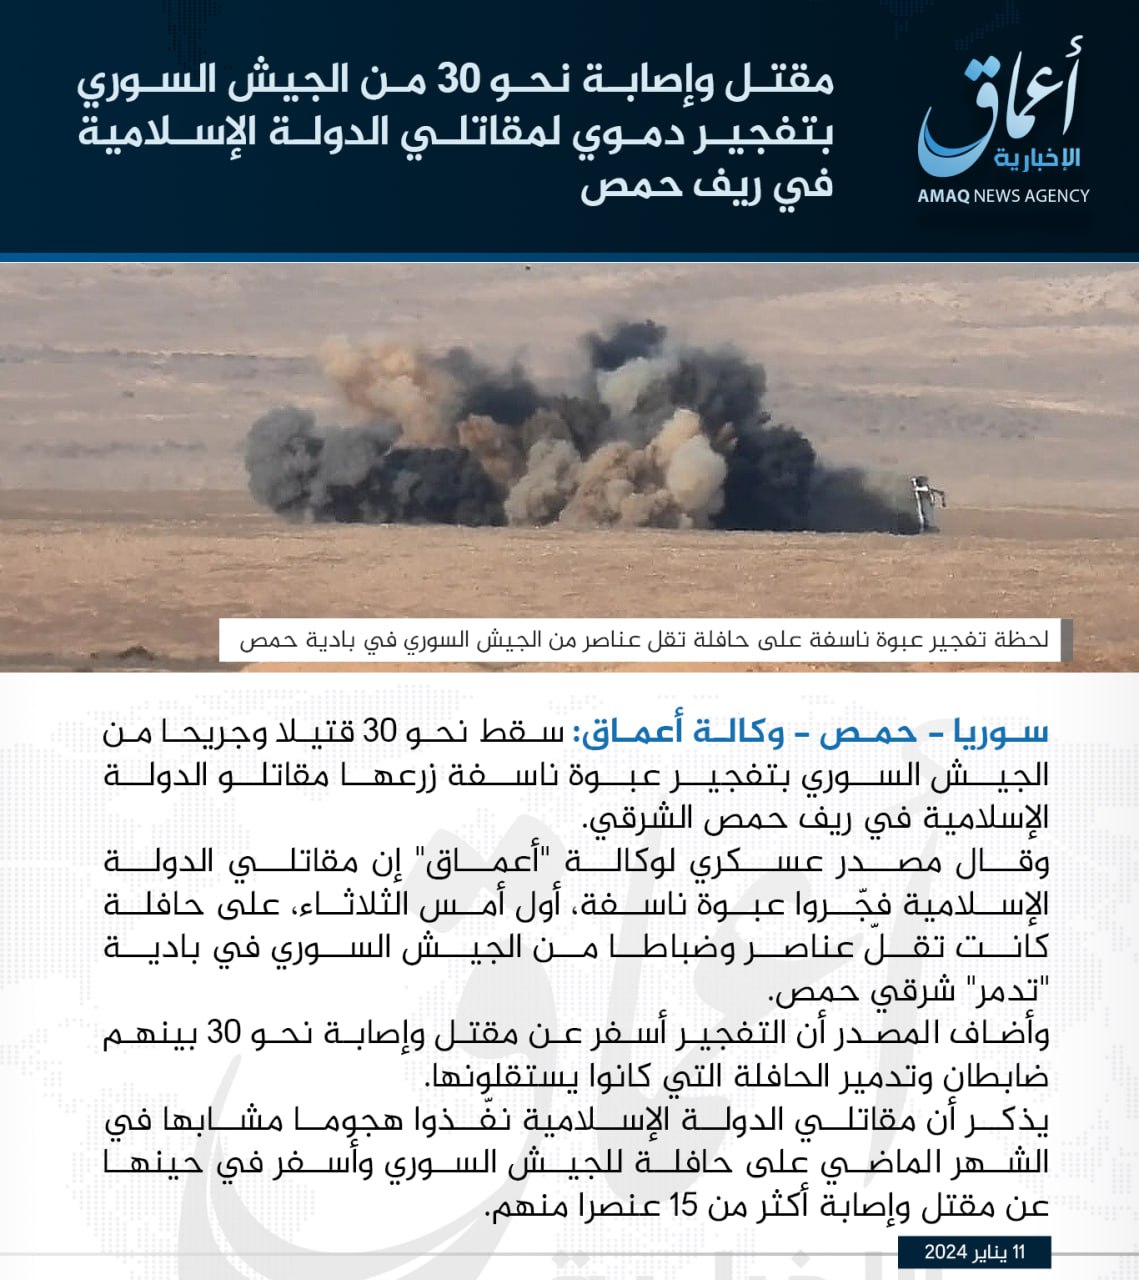 The Islamic State organization claimed responsibility for targeting a military vehicle for the Syrian regime forces east of Homs.